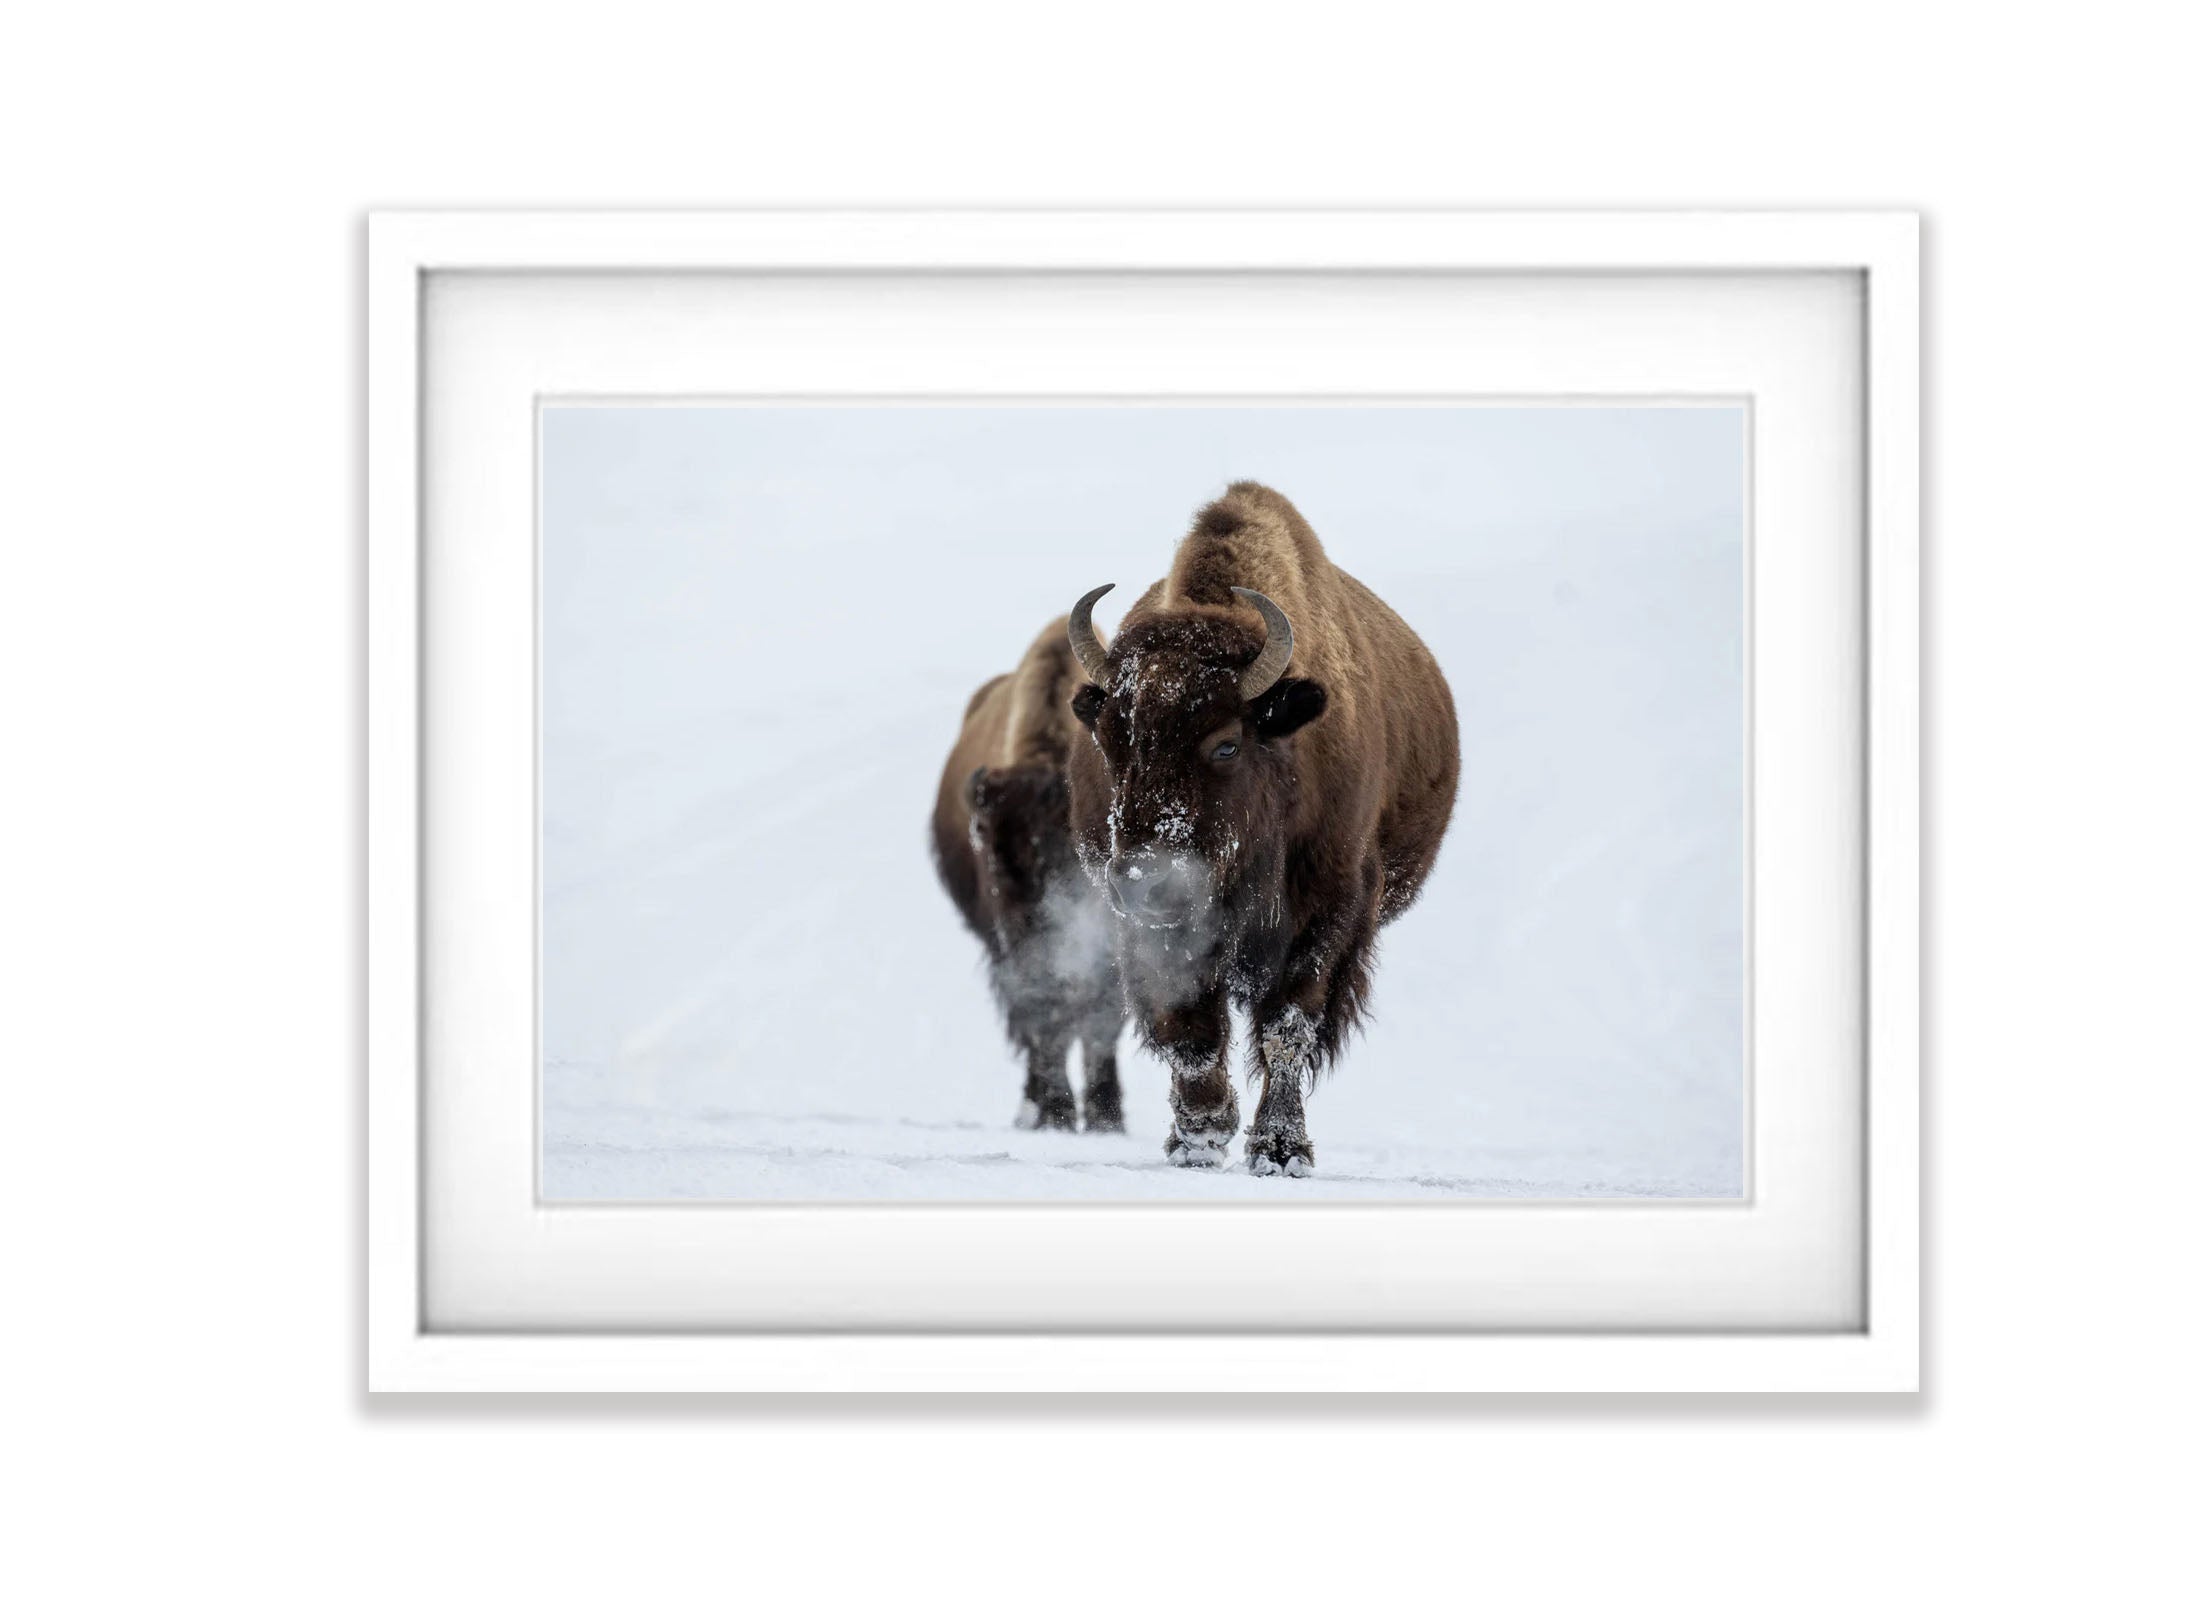 The Bison blowing off steam, Yellowstone NP